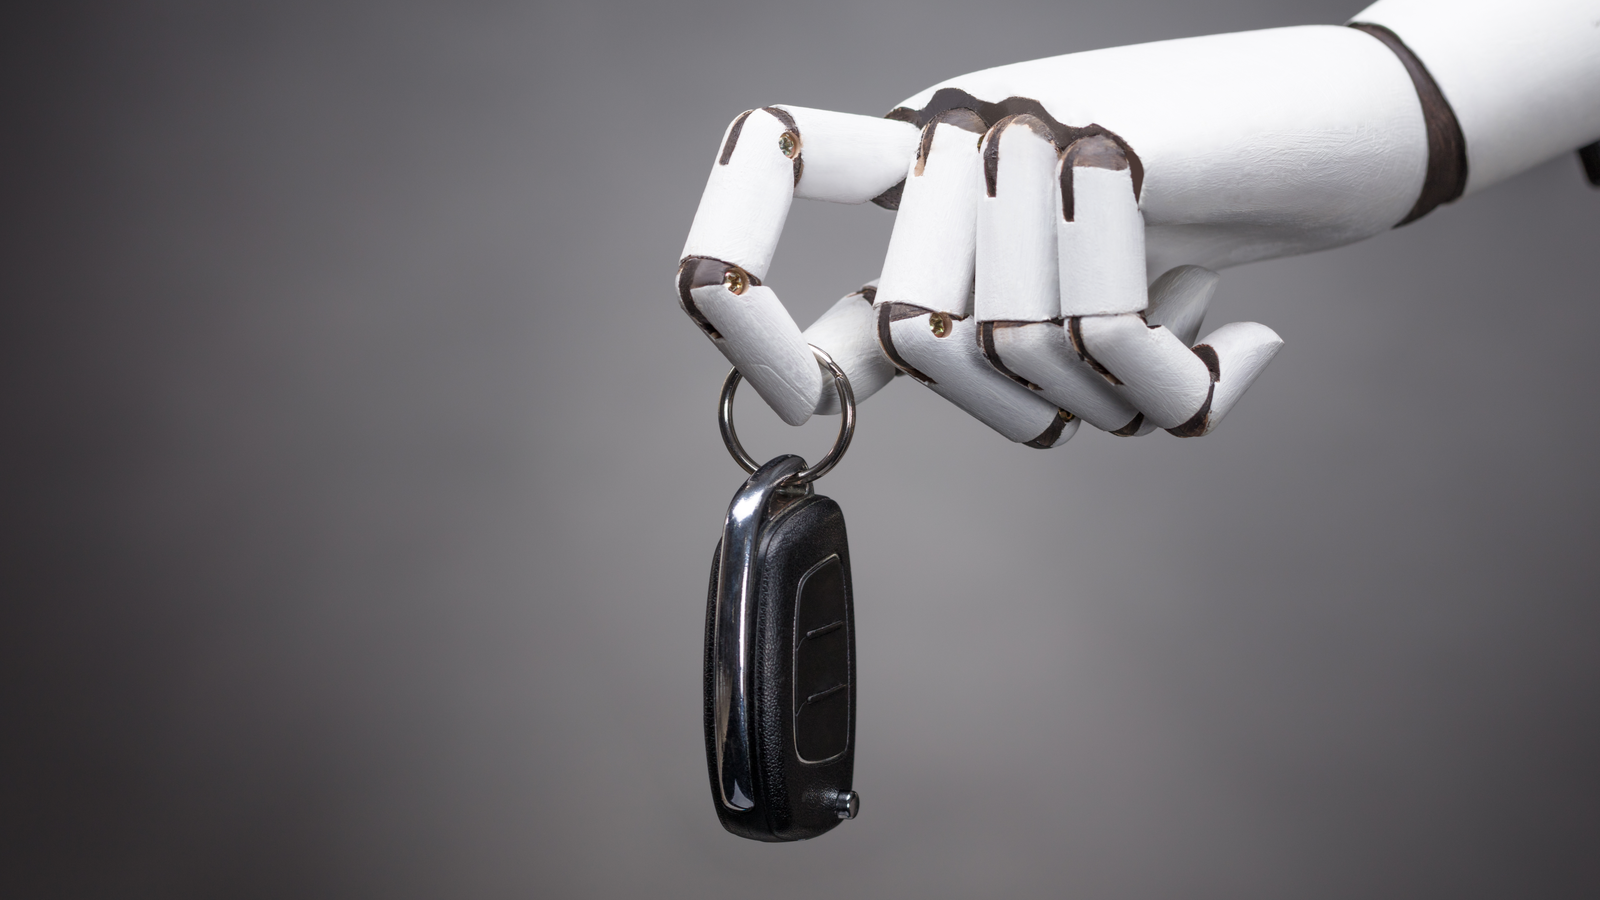 ARBE Stock. An image of a robotic hand holding a car key, autonomous driving